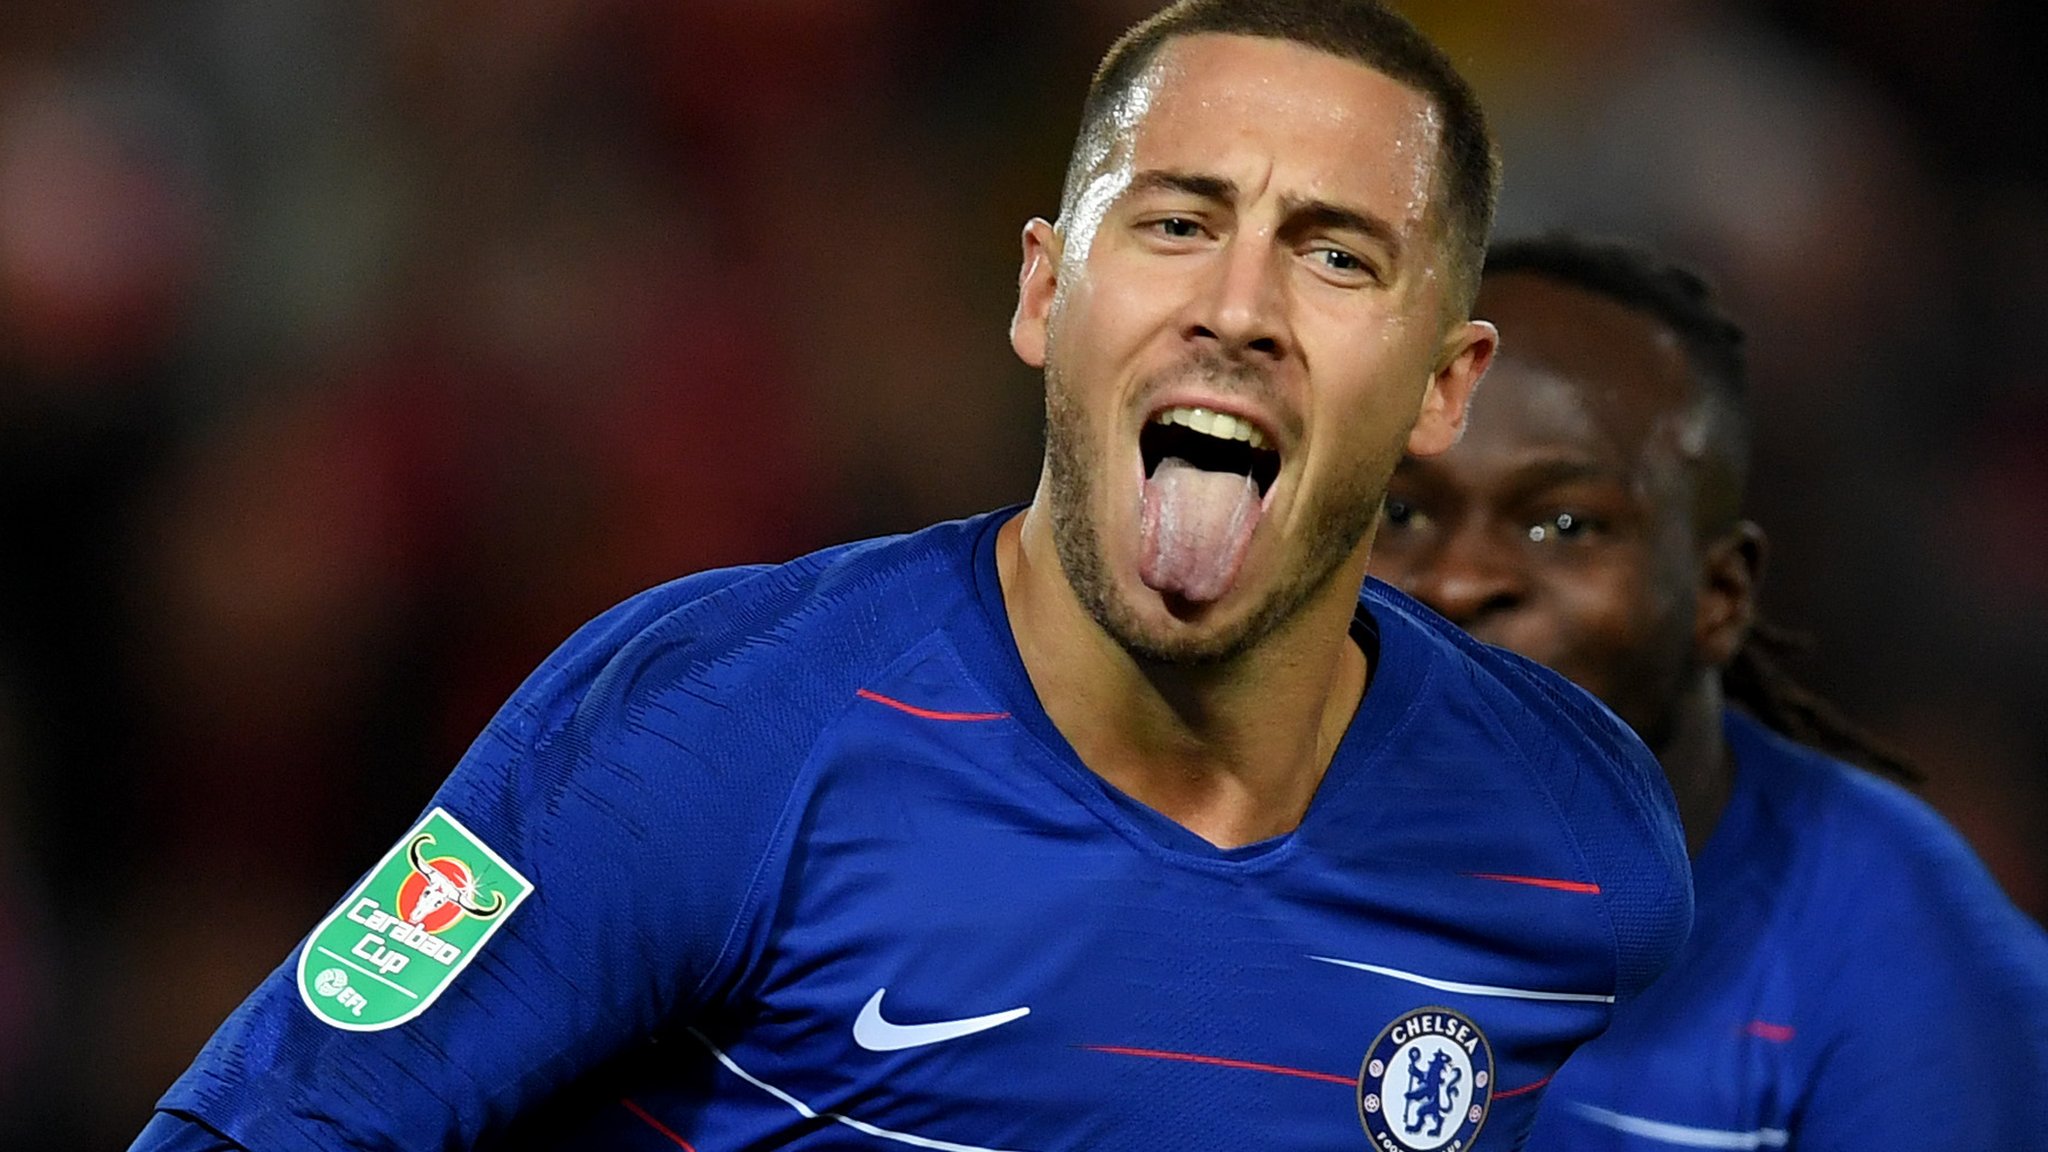 'Remarkable' Hazard strikes late as Chelsea end Liverpool's perfect start